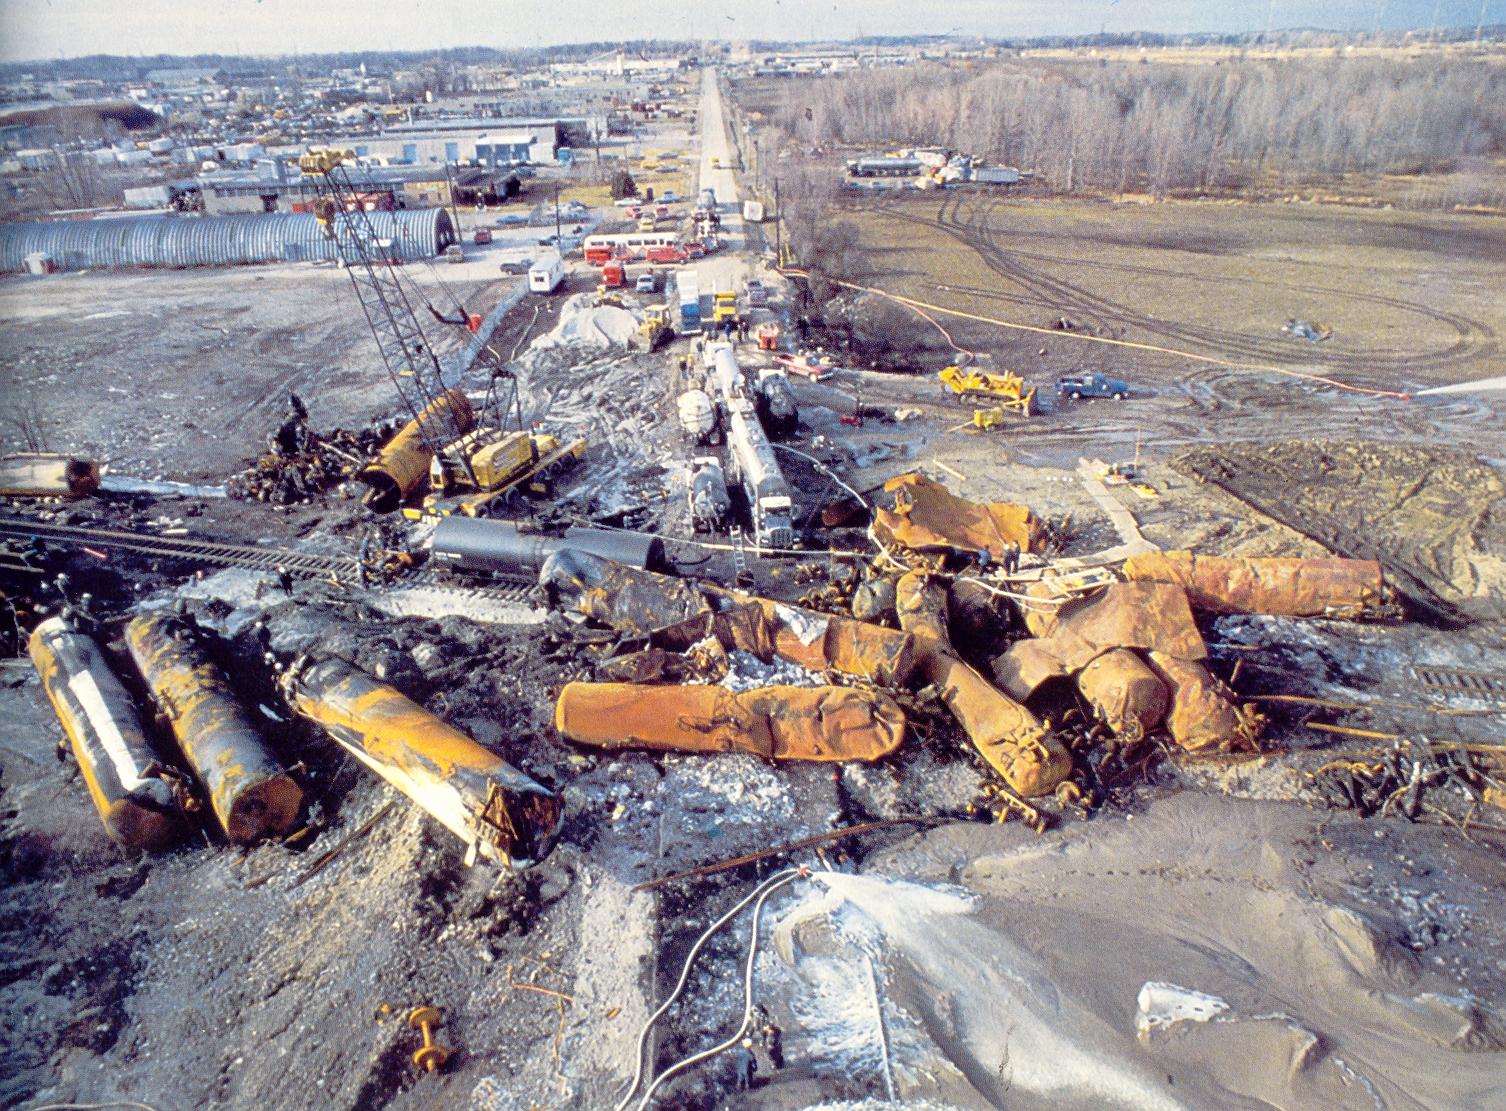 The aftermath of the Train Derailment once the fire was quenched and the chlorine leak was blocked.